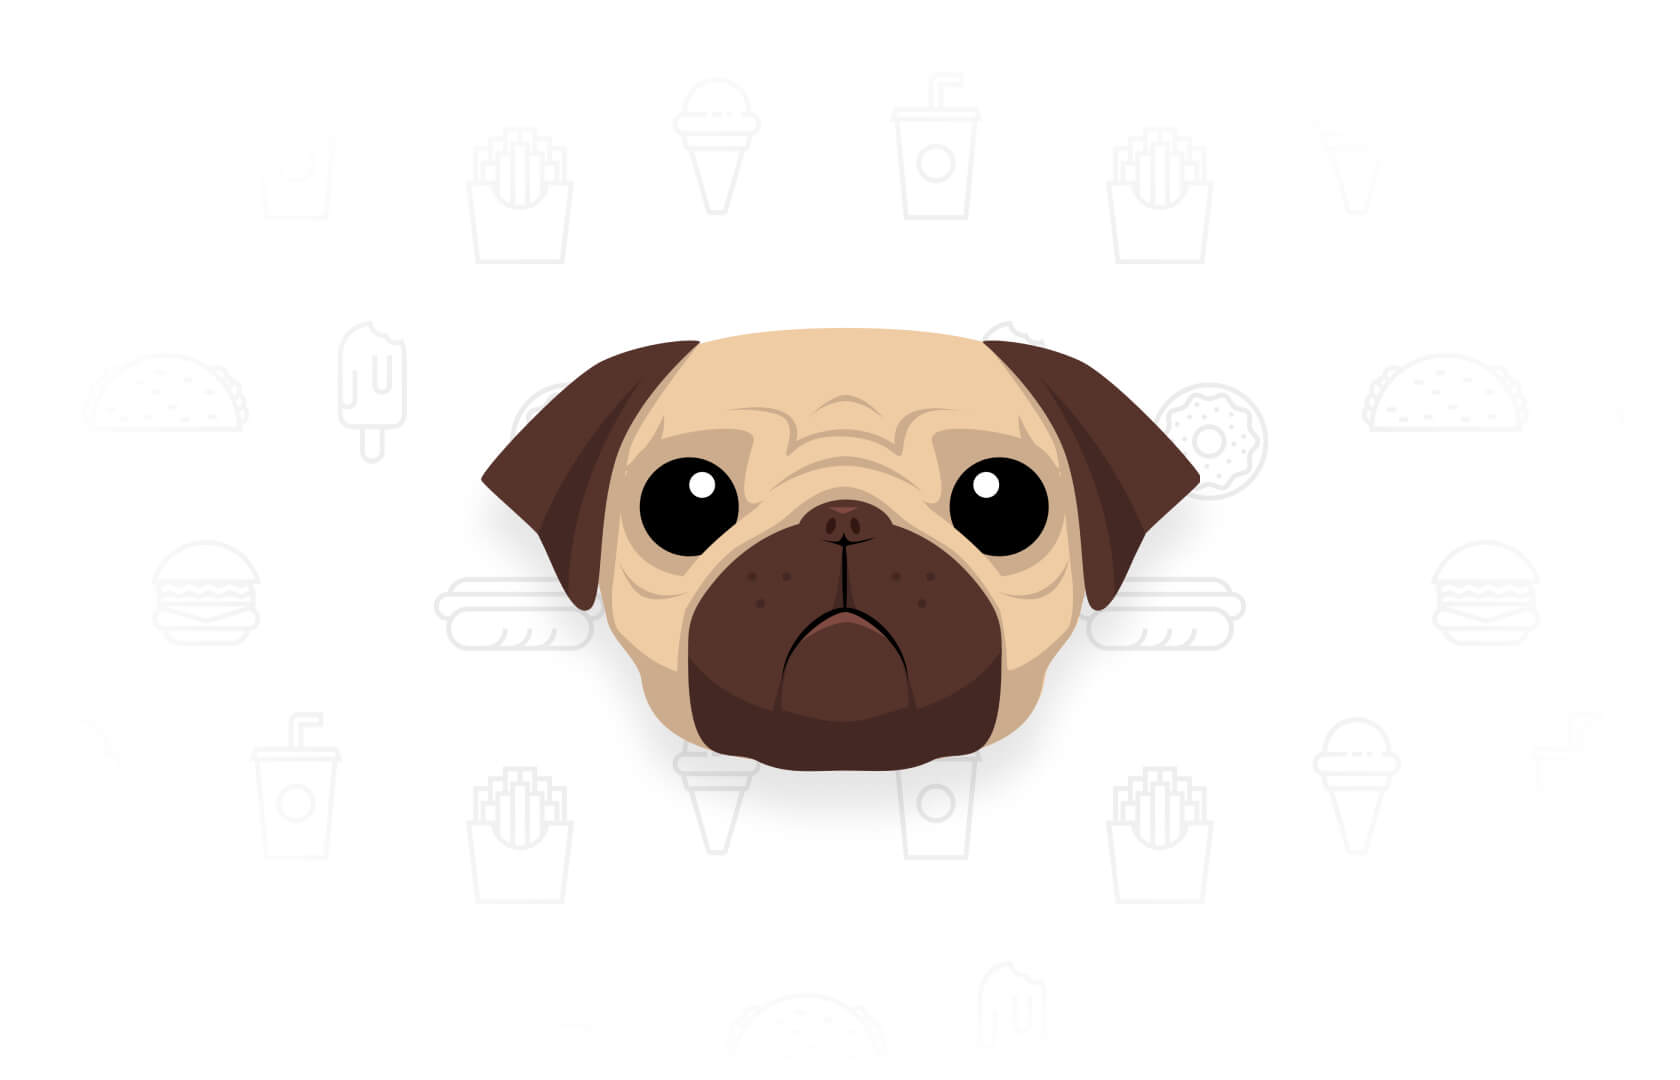 A lightweight starter project that uses PUG for the templating, TailwindCSS for the styling, and ExpressJS as the framework.